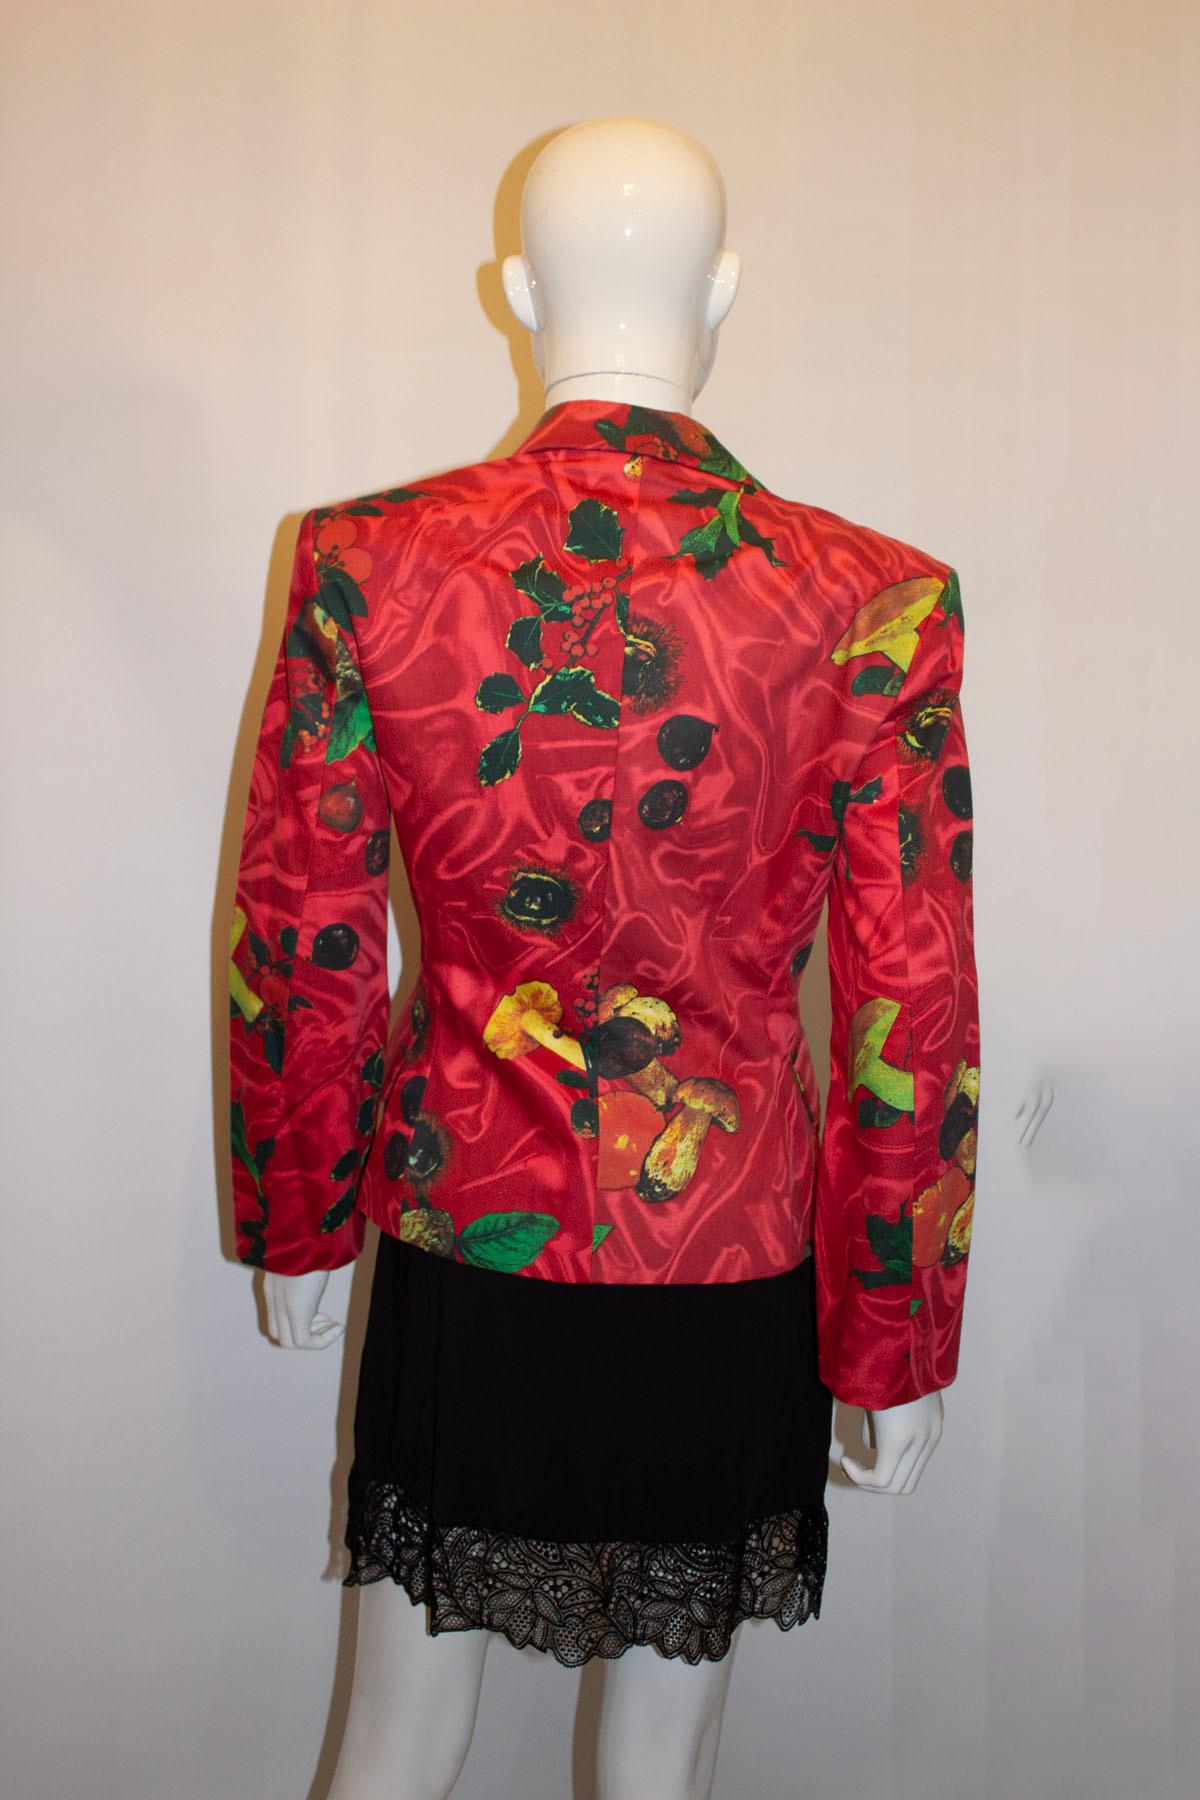 A fun and striking cotton jacket by Moschino. The cotton jacket has a fruit and fauna print on the outside with stipe bow detail, and cut away collar The lining details it as Moschino, Primavera estate Collection 1989, collezione 2. It fastens with